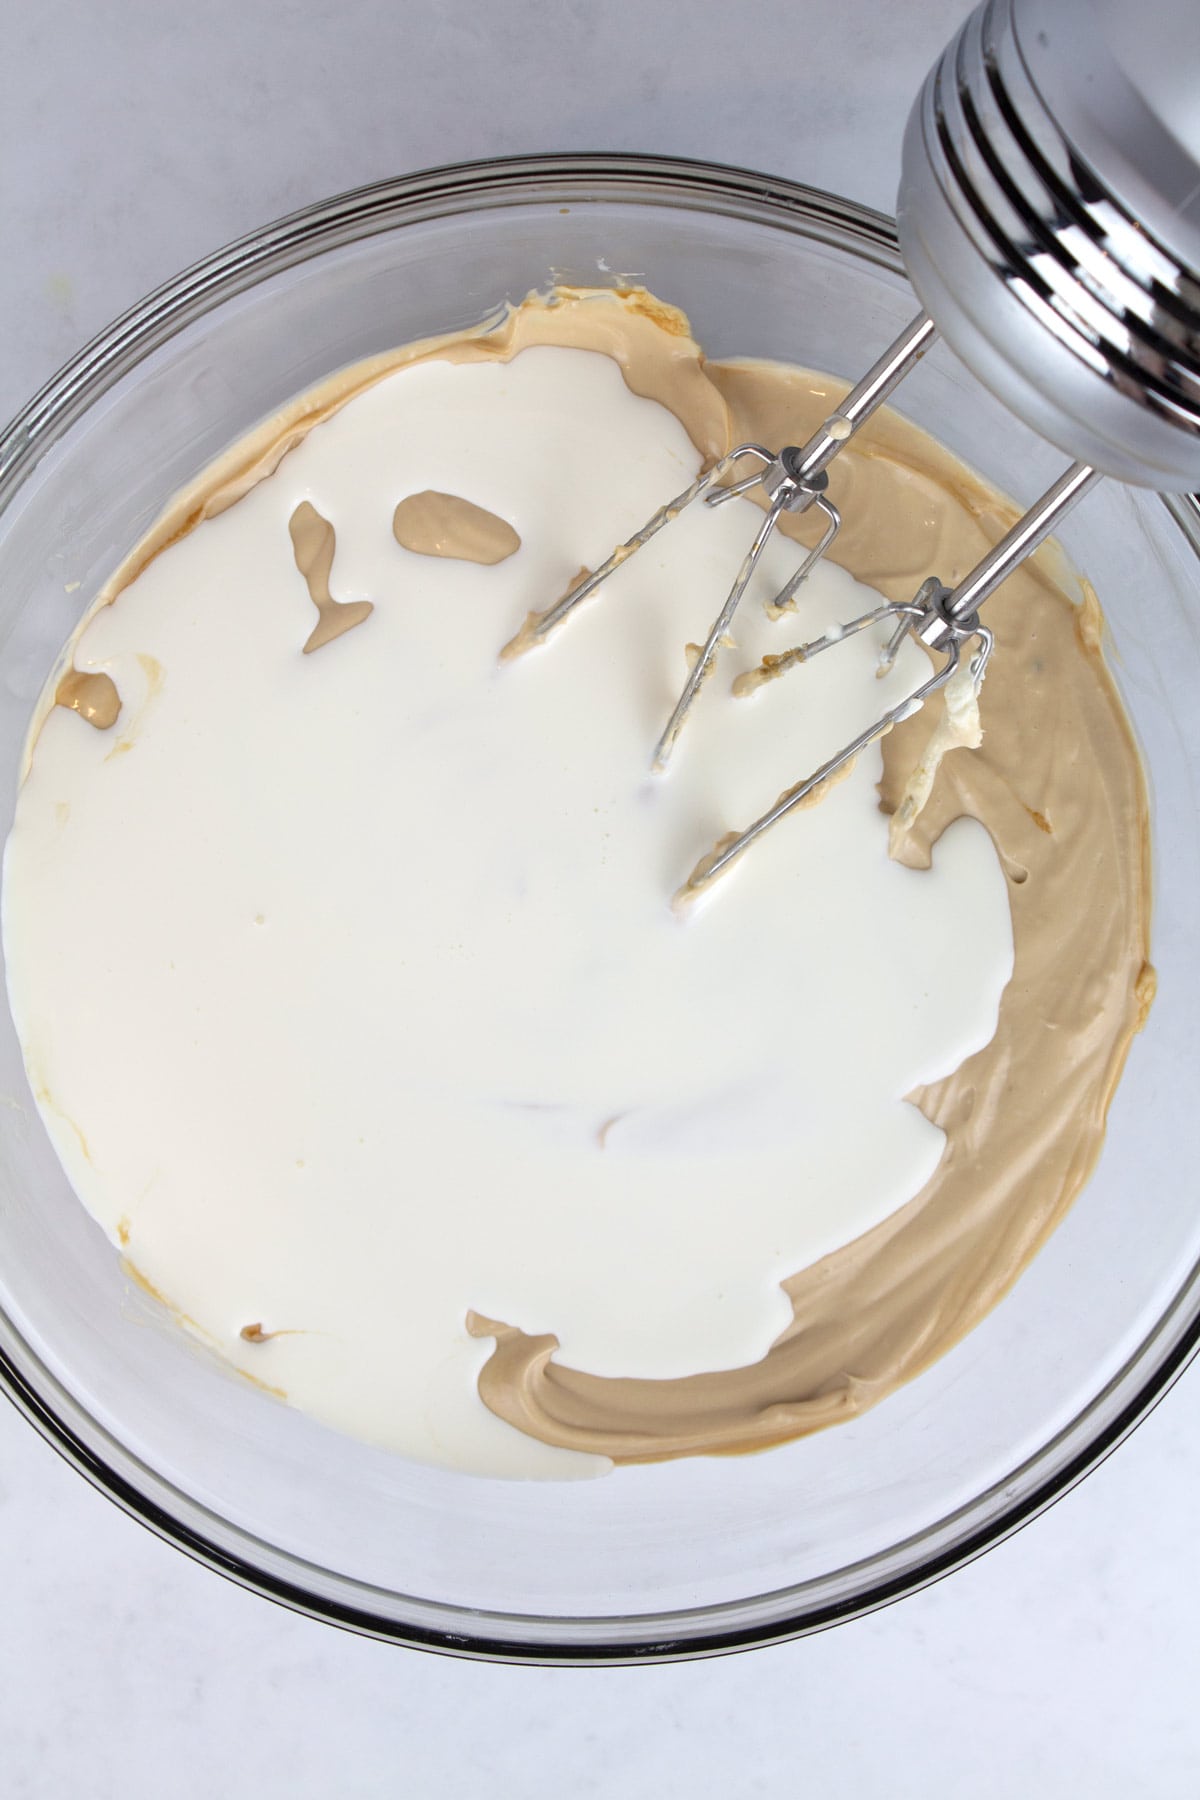 An overhead view of cheesecake batter in a clear glass bowl with cream added on top and a hand mixer in the back.